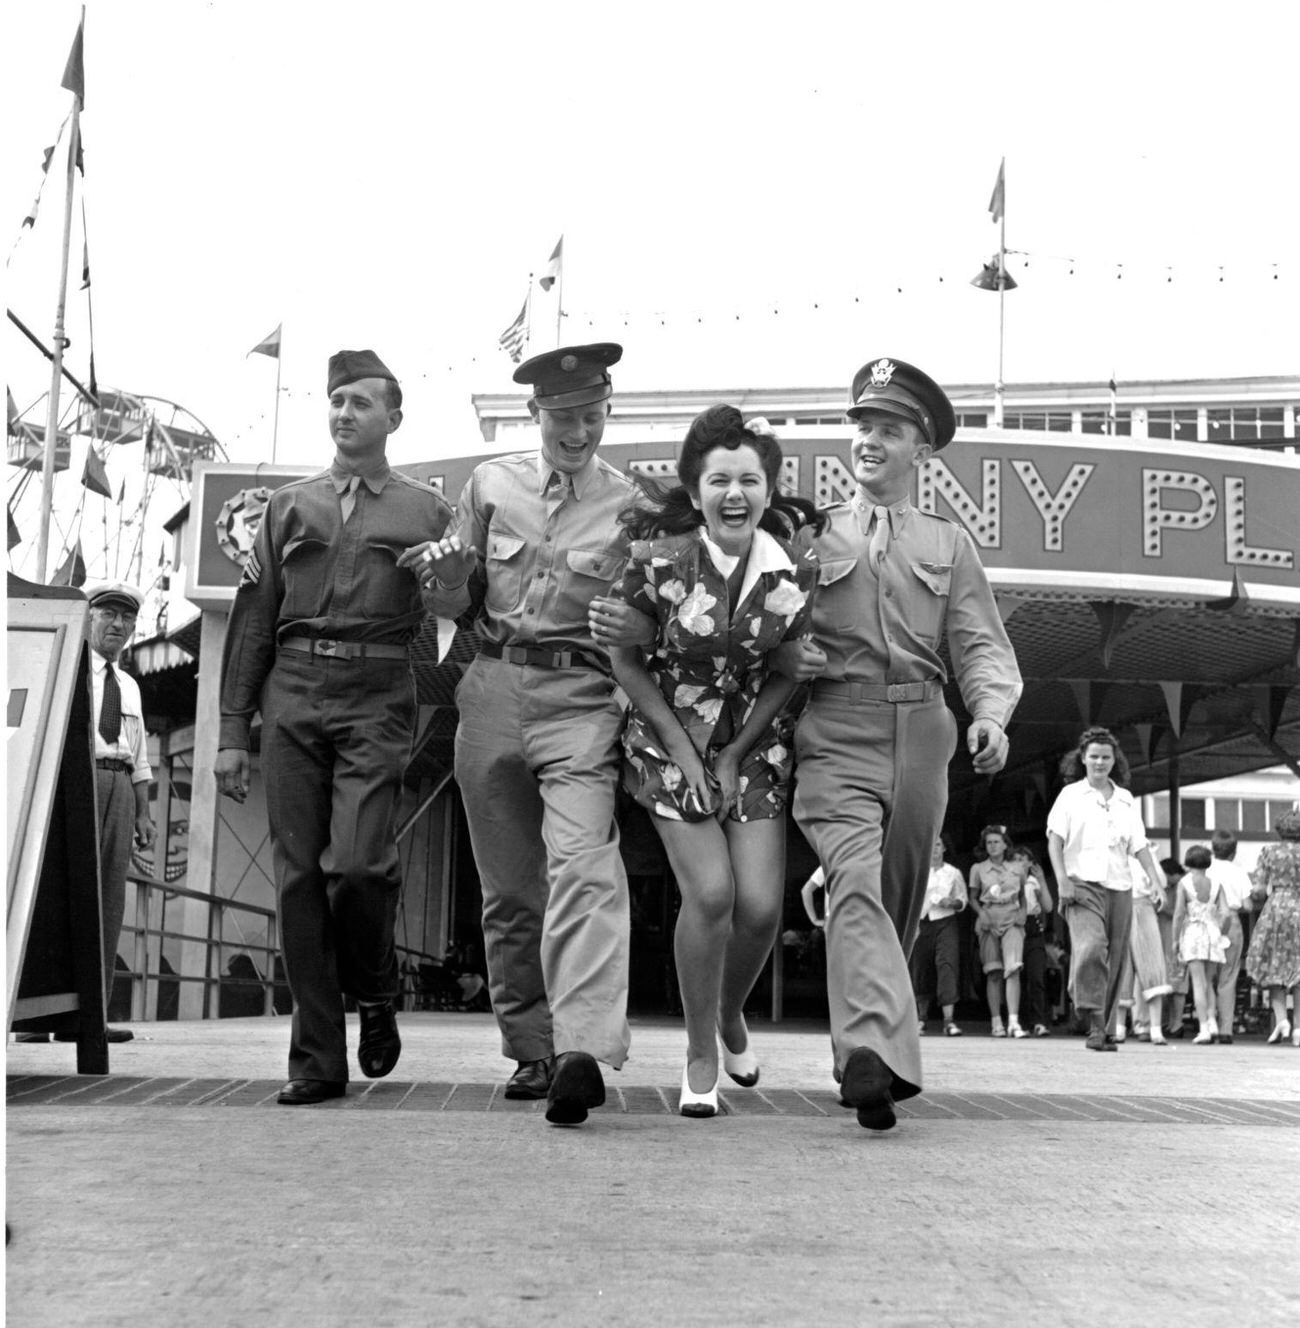 Soldiers And Woman Leaving Amusement Park, 1955